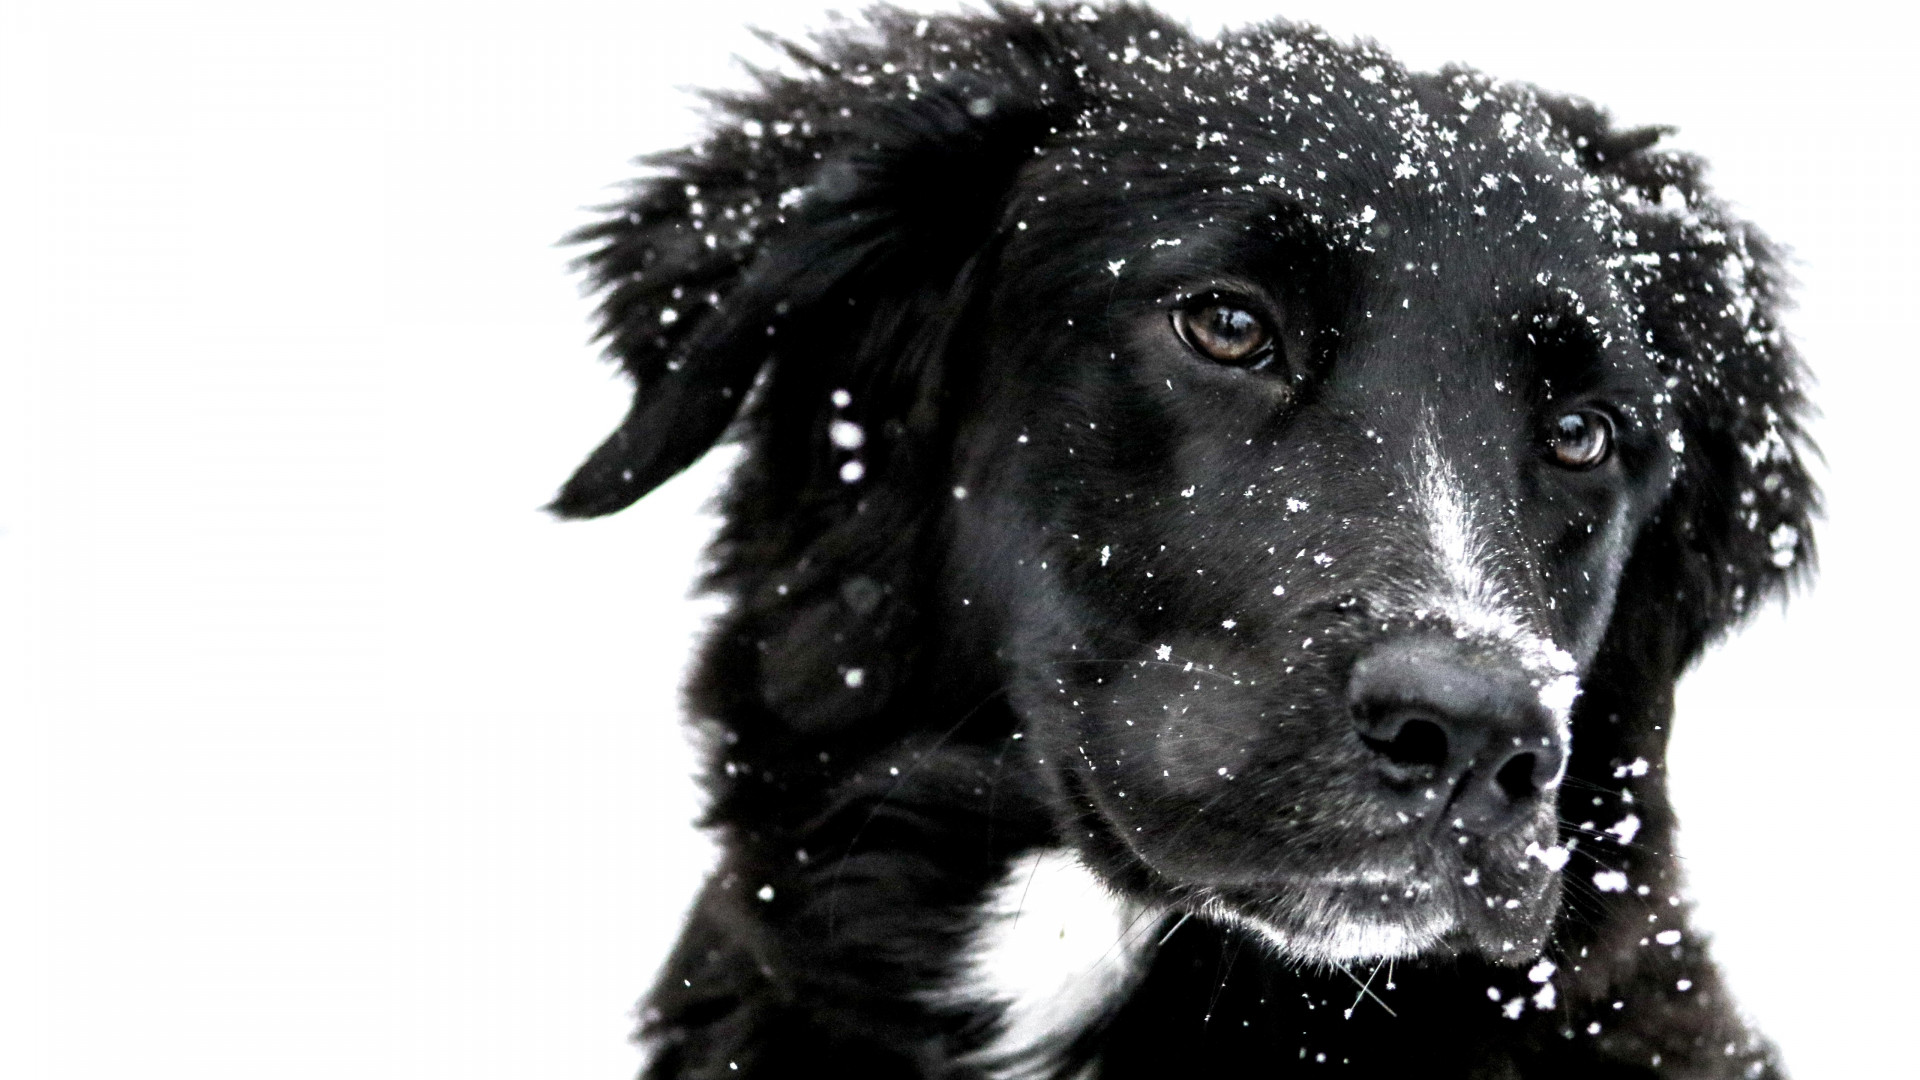 Snowing over the cute dog wallpaper 1920x1080